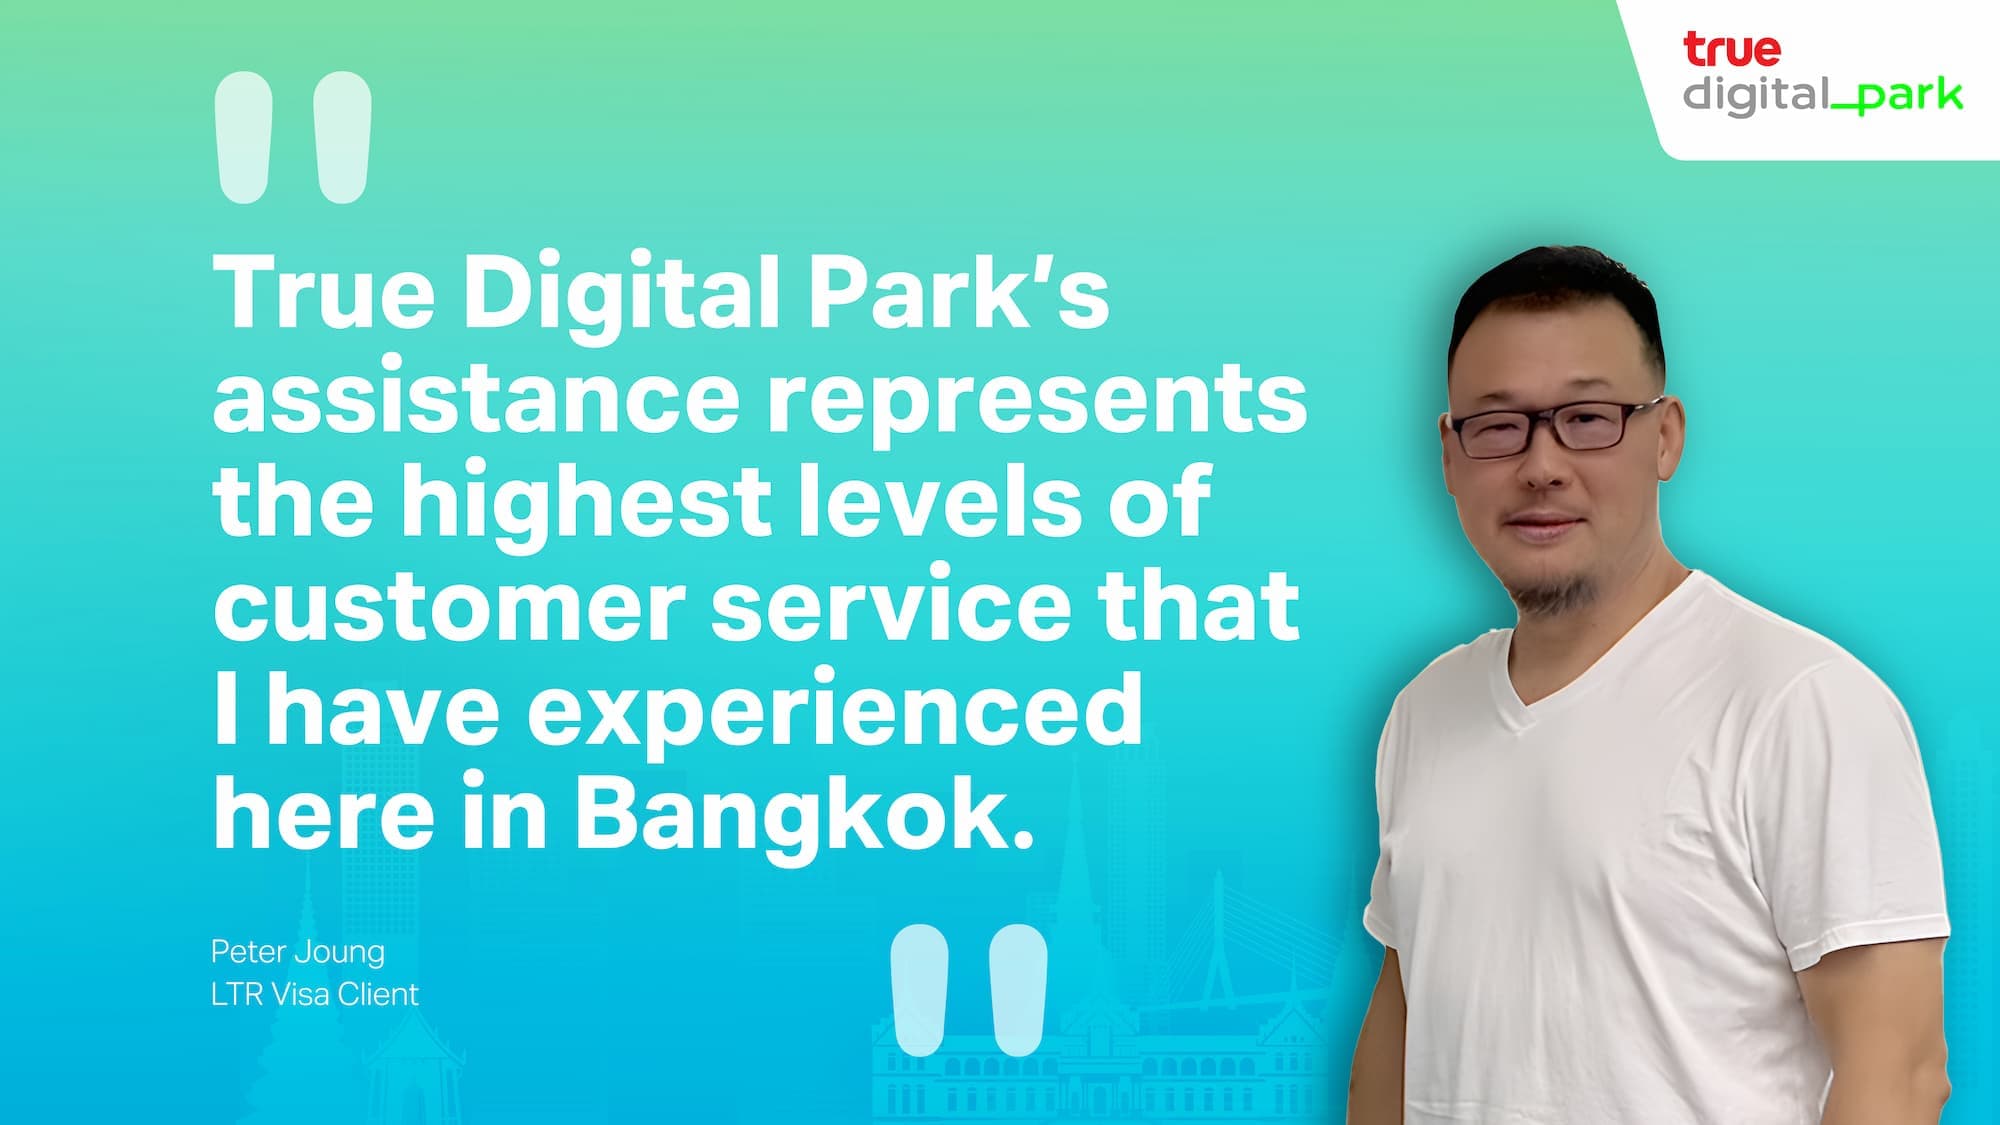 True Digital Park: Enabling seamless path for foreigners to Thailand with LTR Visa